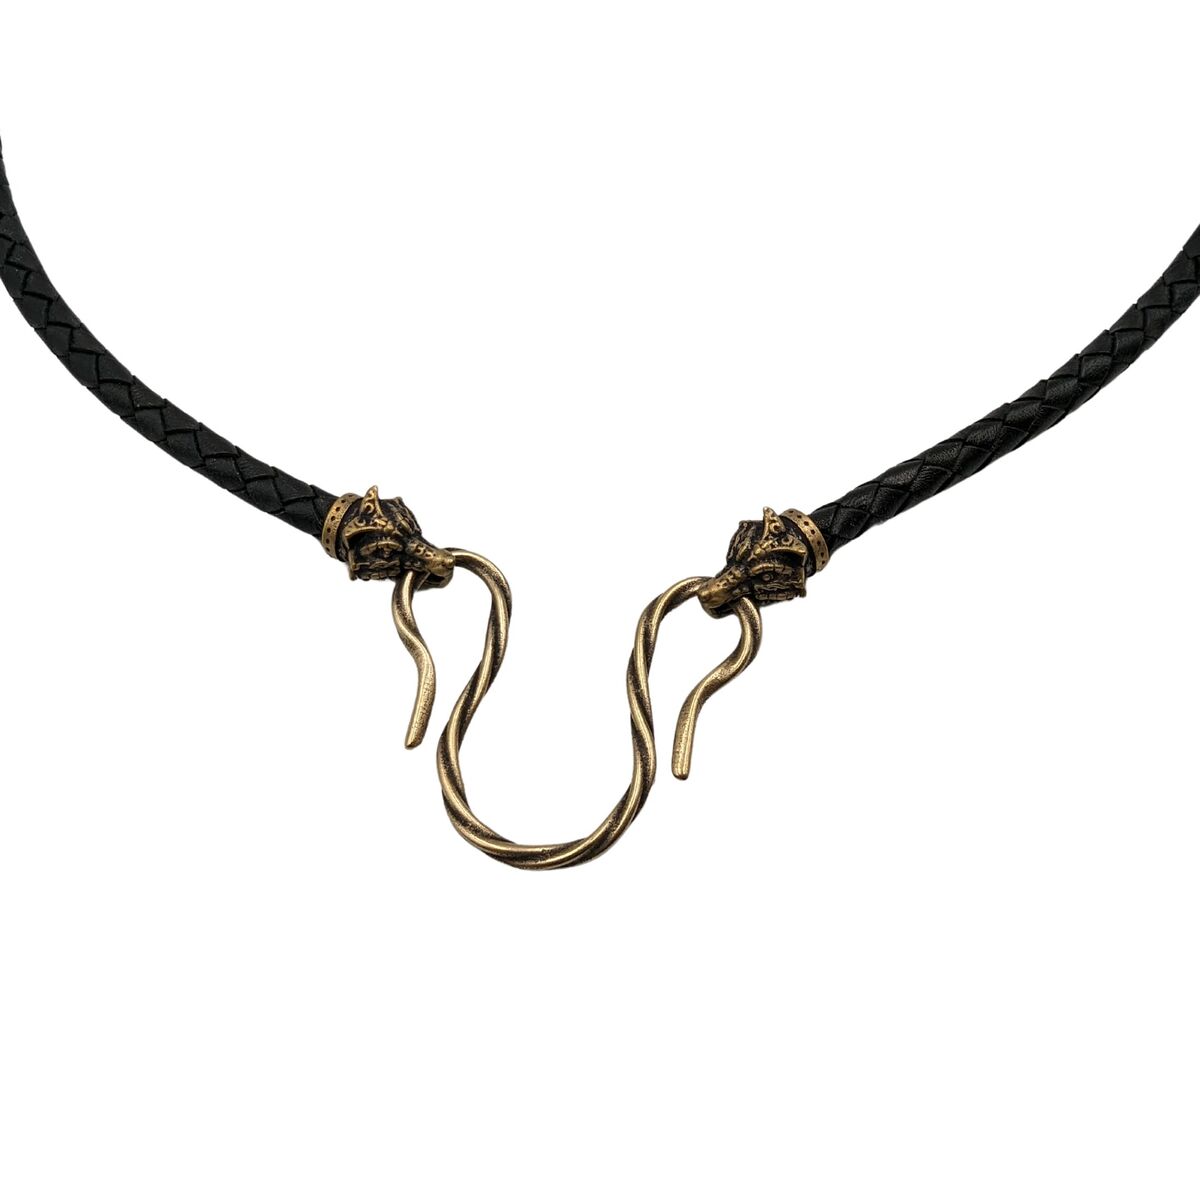 Celtic Fox leather necklace with Bronze clasps 45 cm | 17 inch Black Omega clasp 